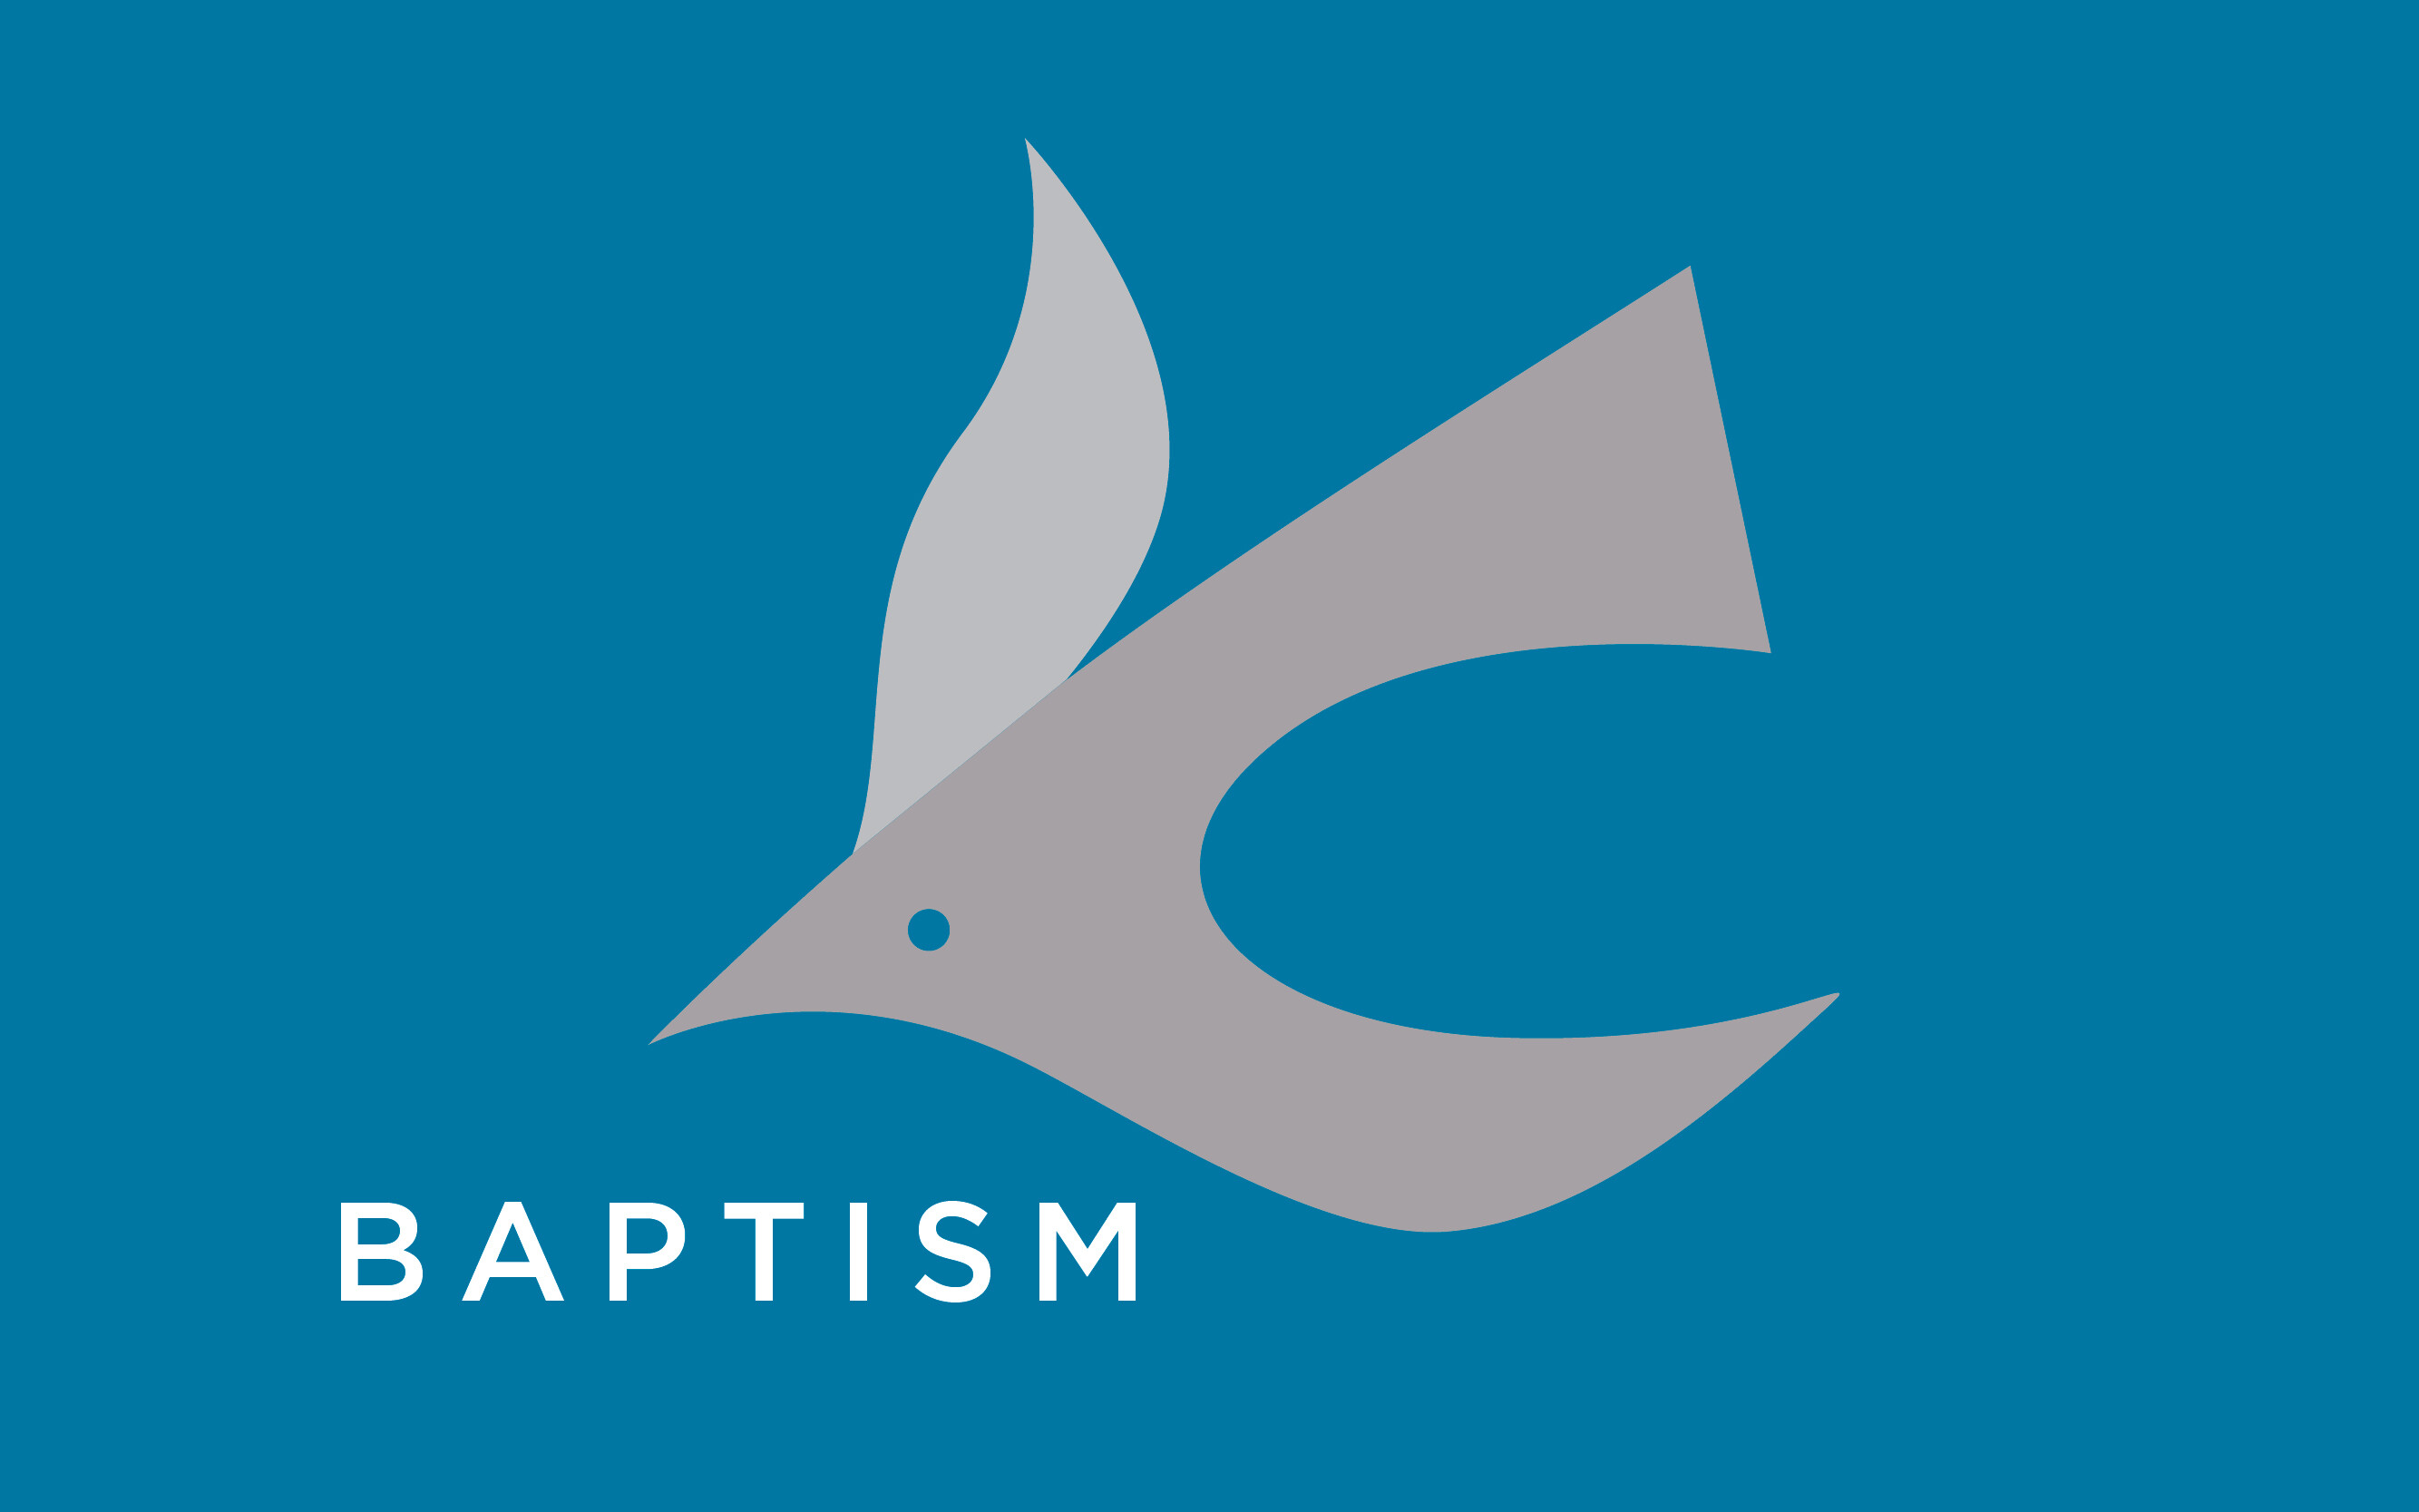 Questions About Baptism